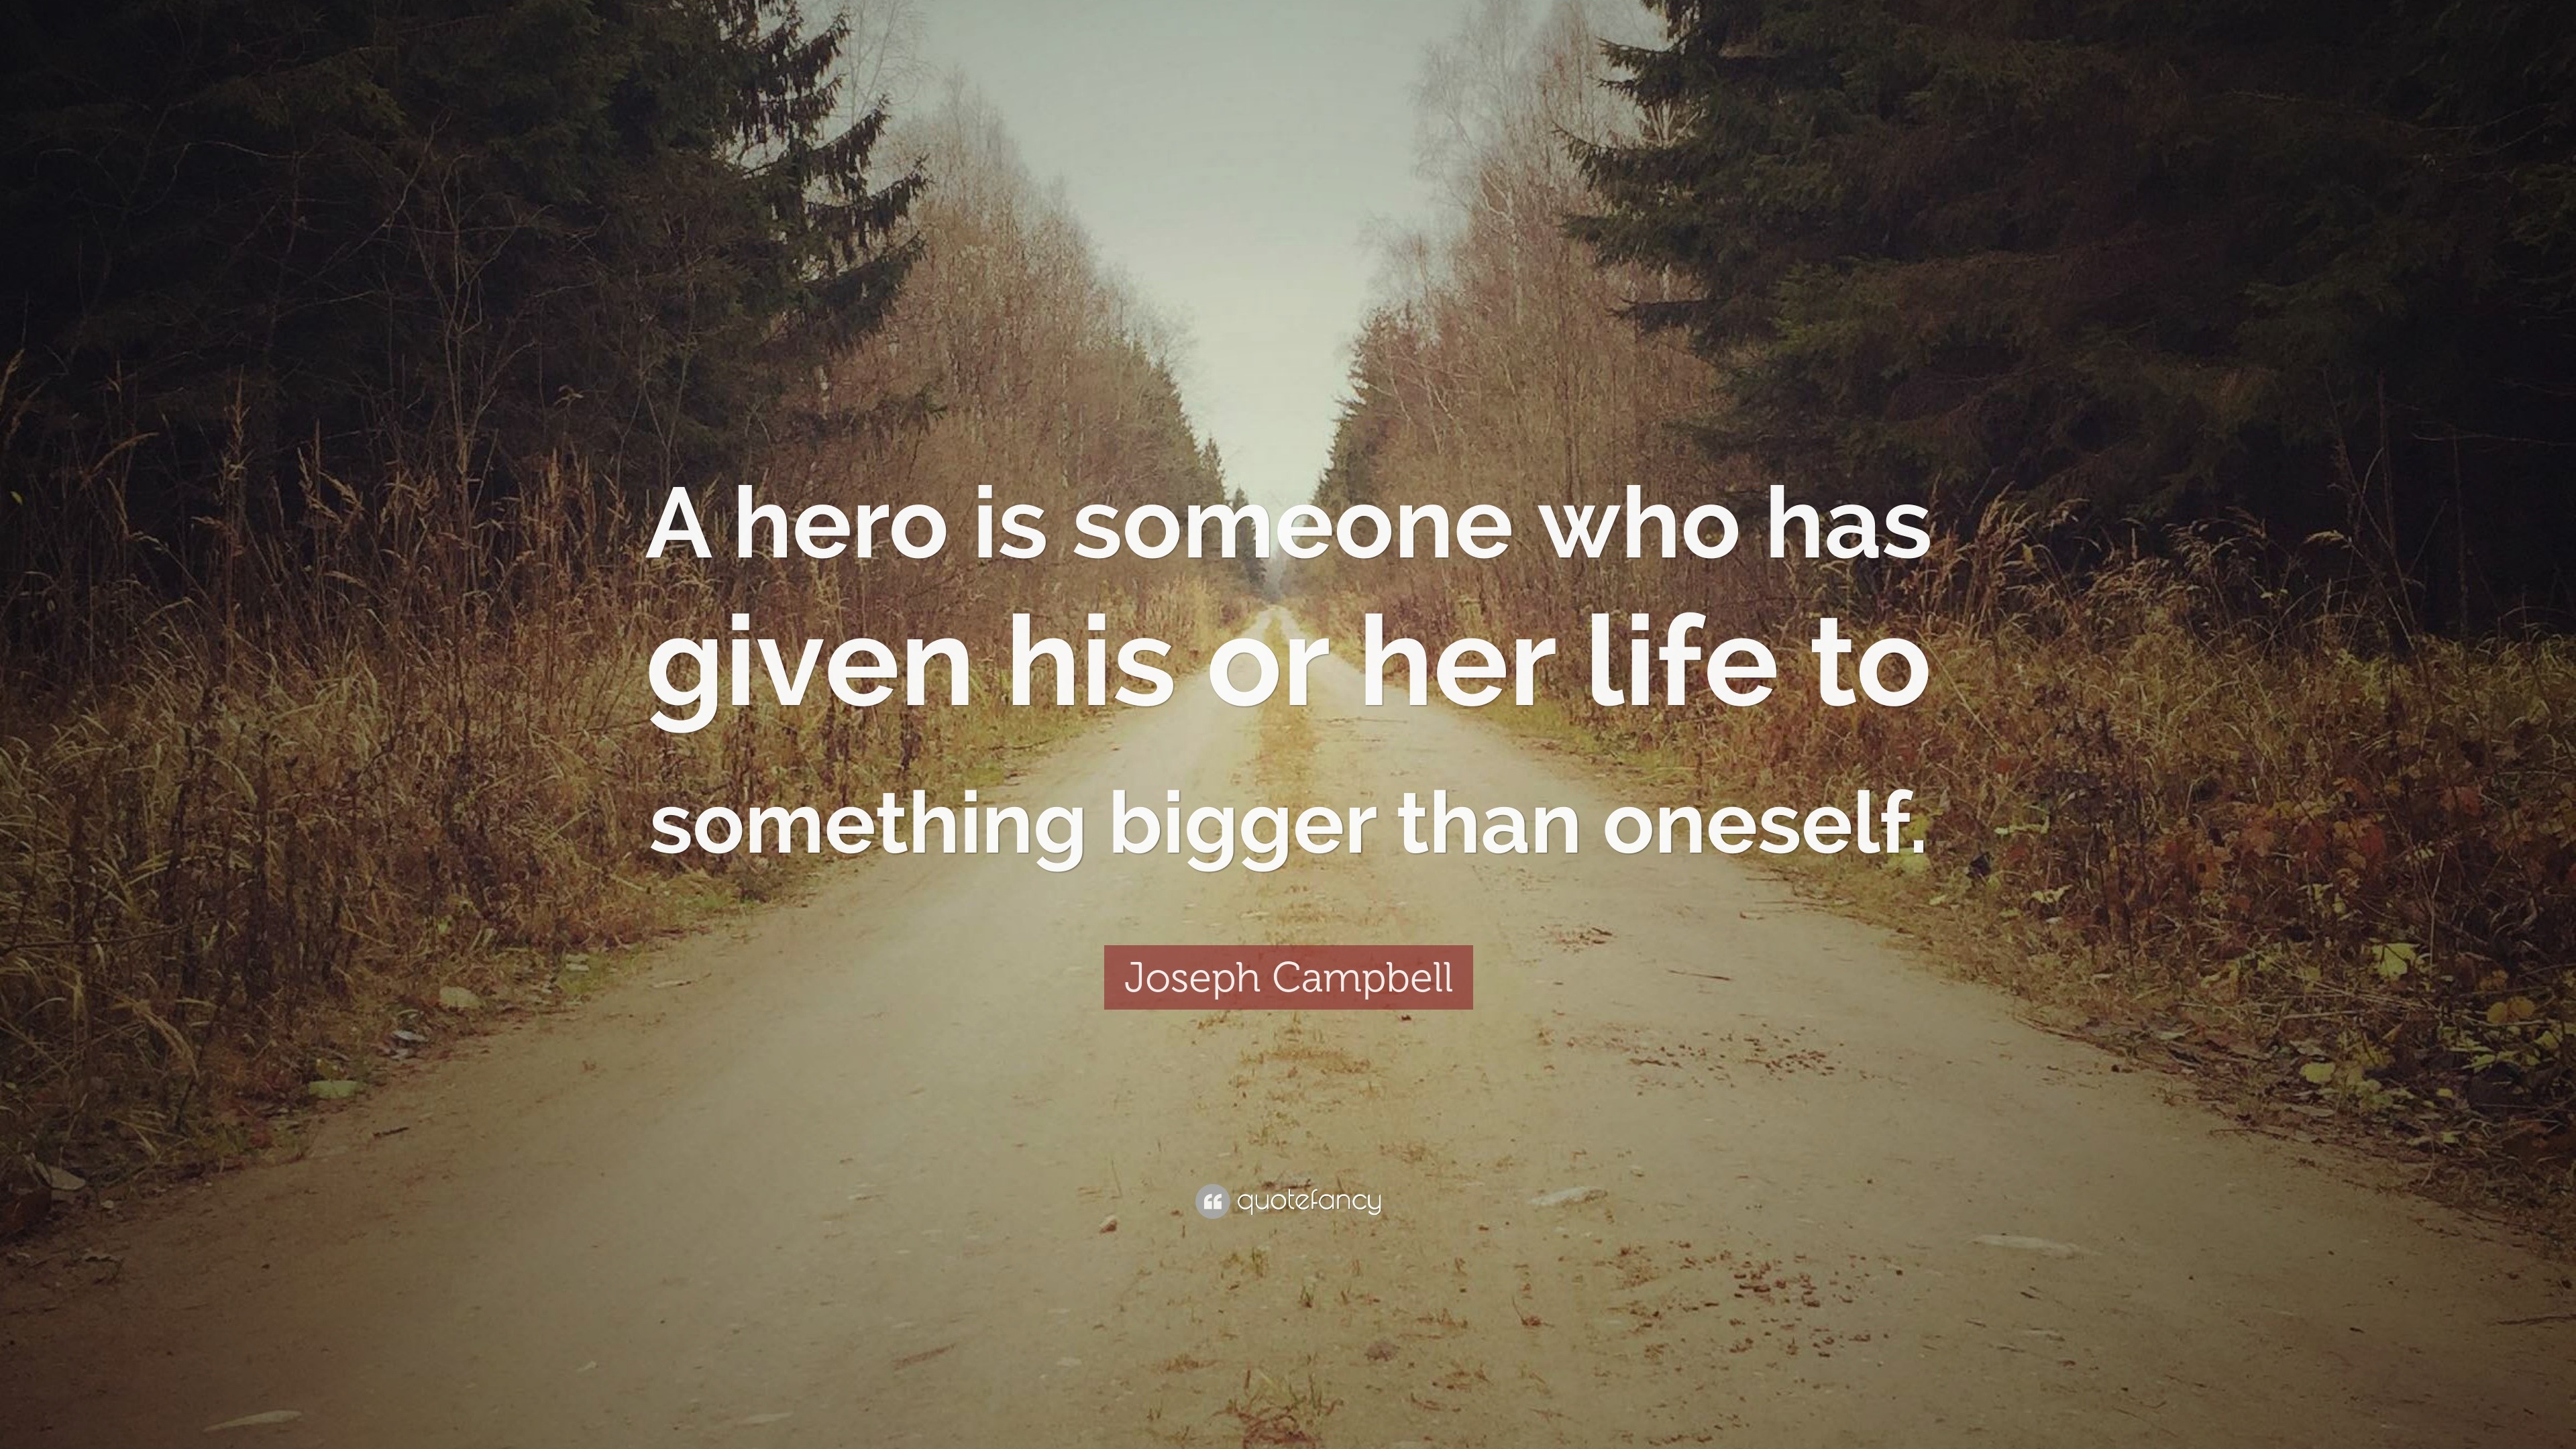 1709069 Joseph Campbell Quote A hero is someone who has given his or her